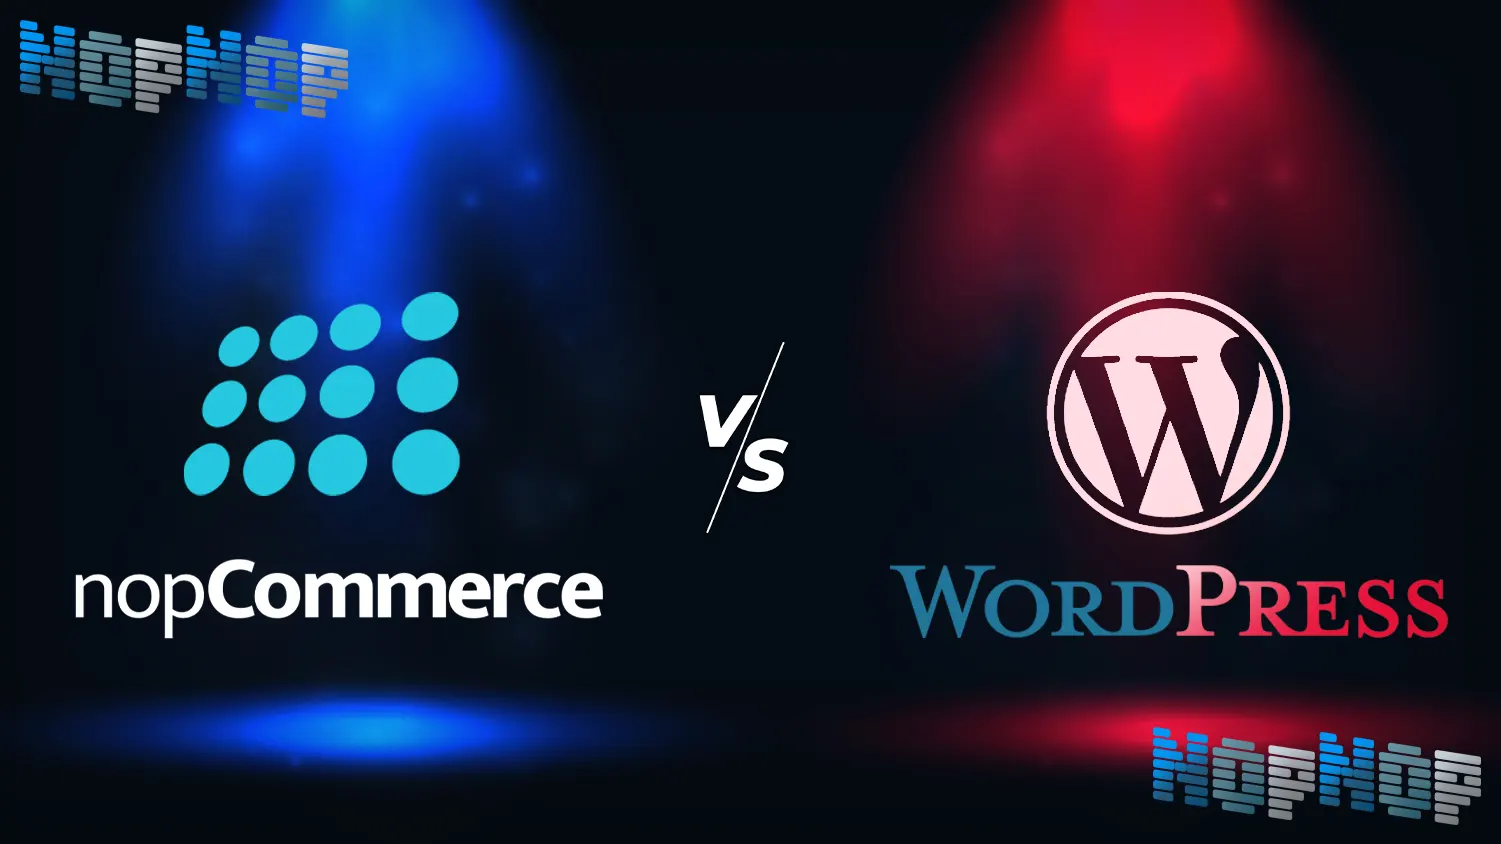 Comparison of Nopcommerce features with other free CMS